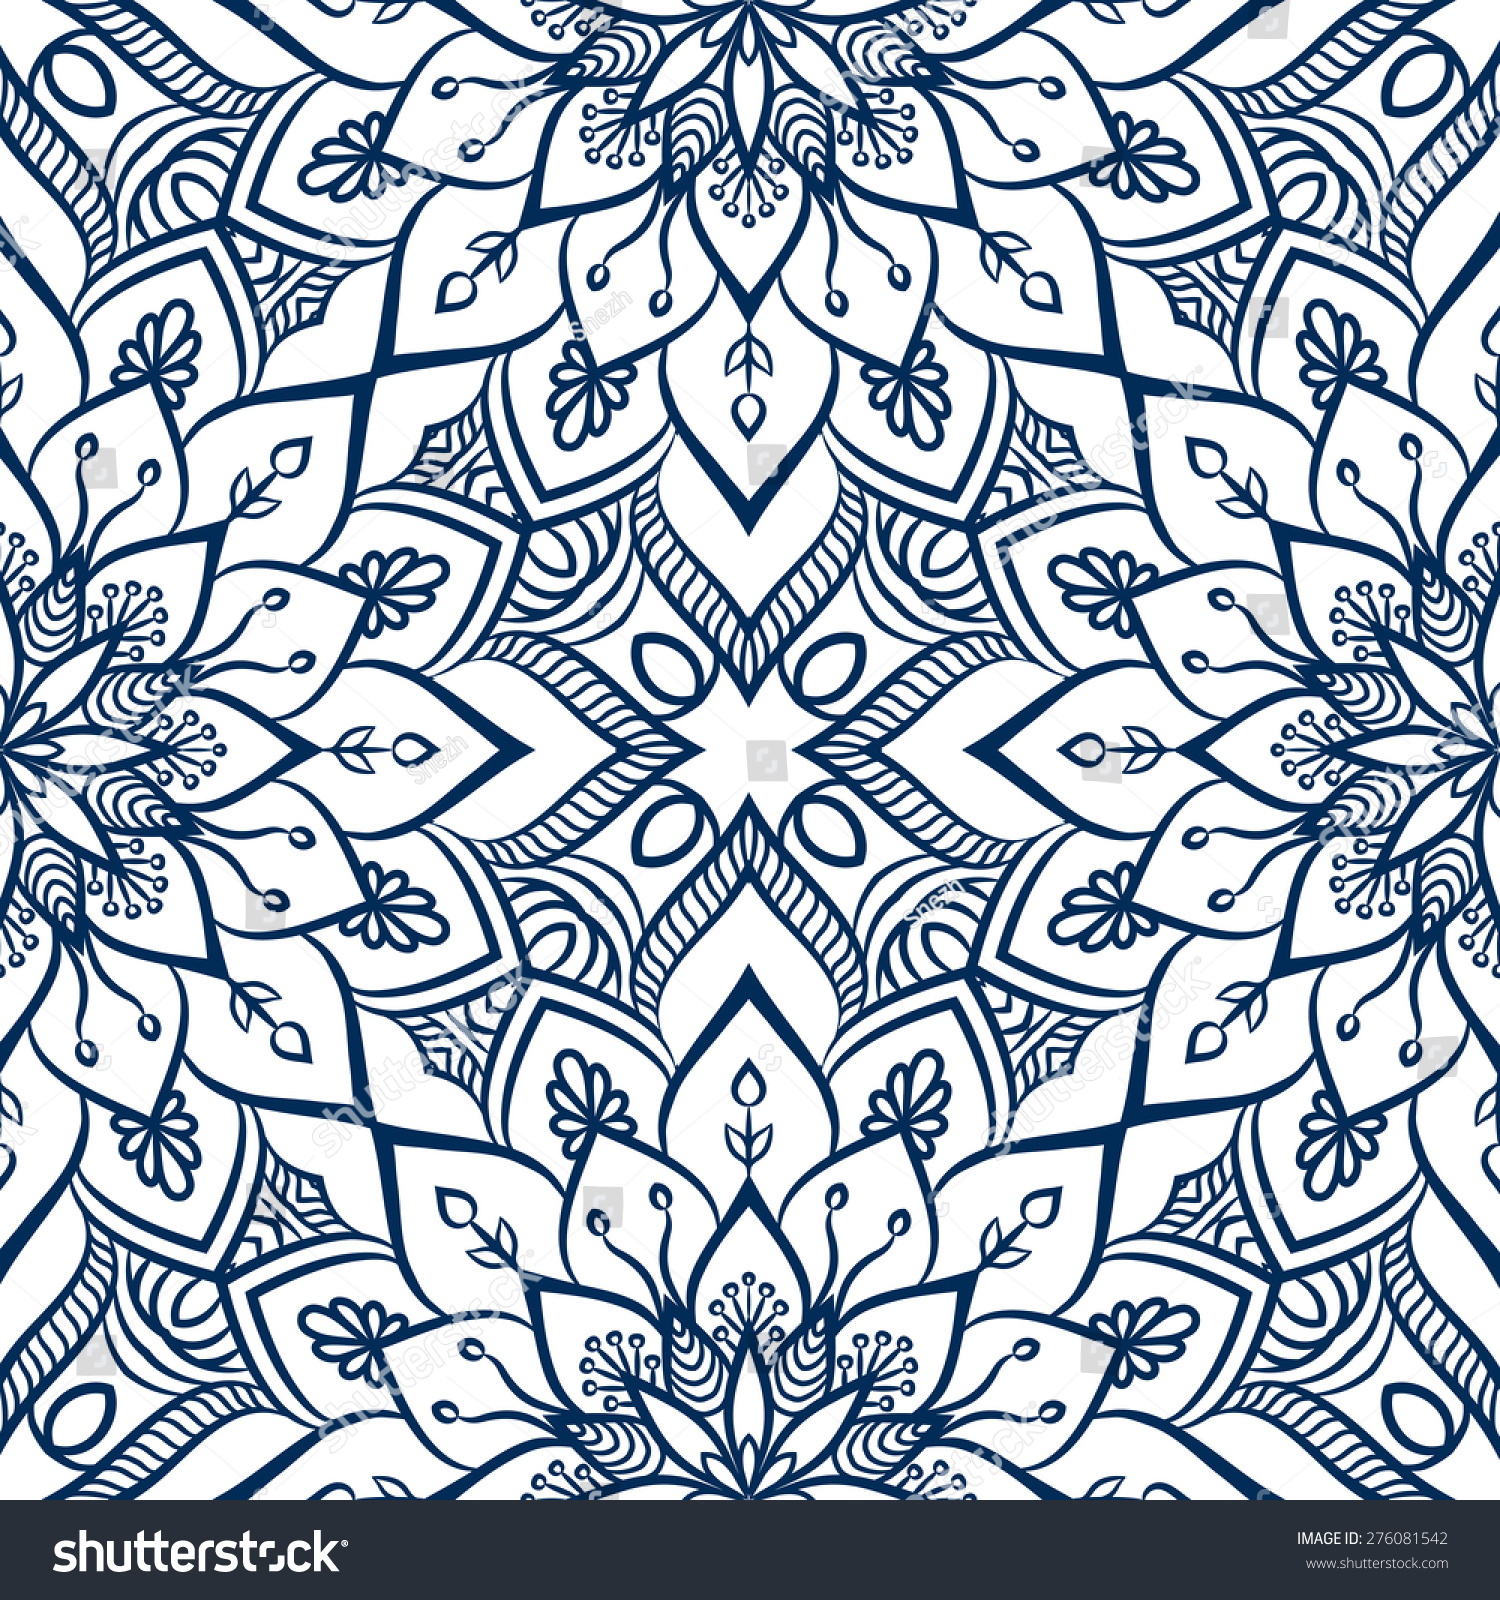 Seamless Pattern Vintage Decorative Elements Hand Stock Vector (Royalty ...